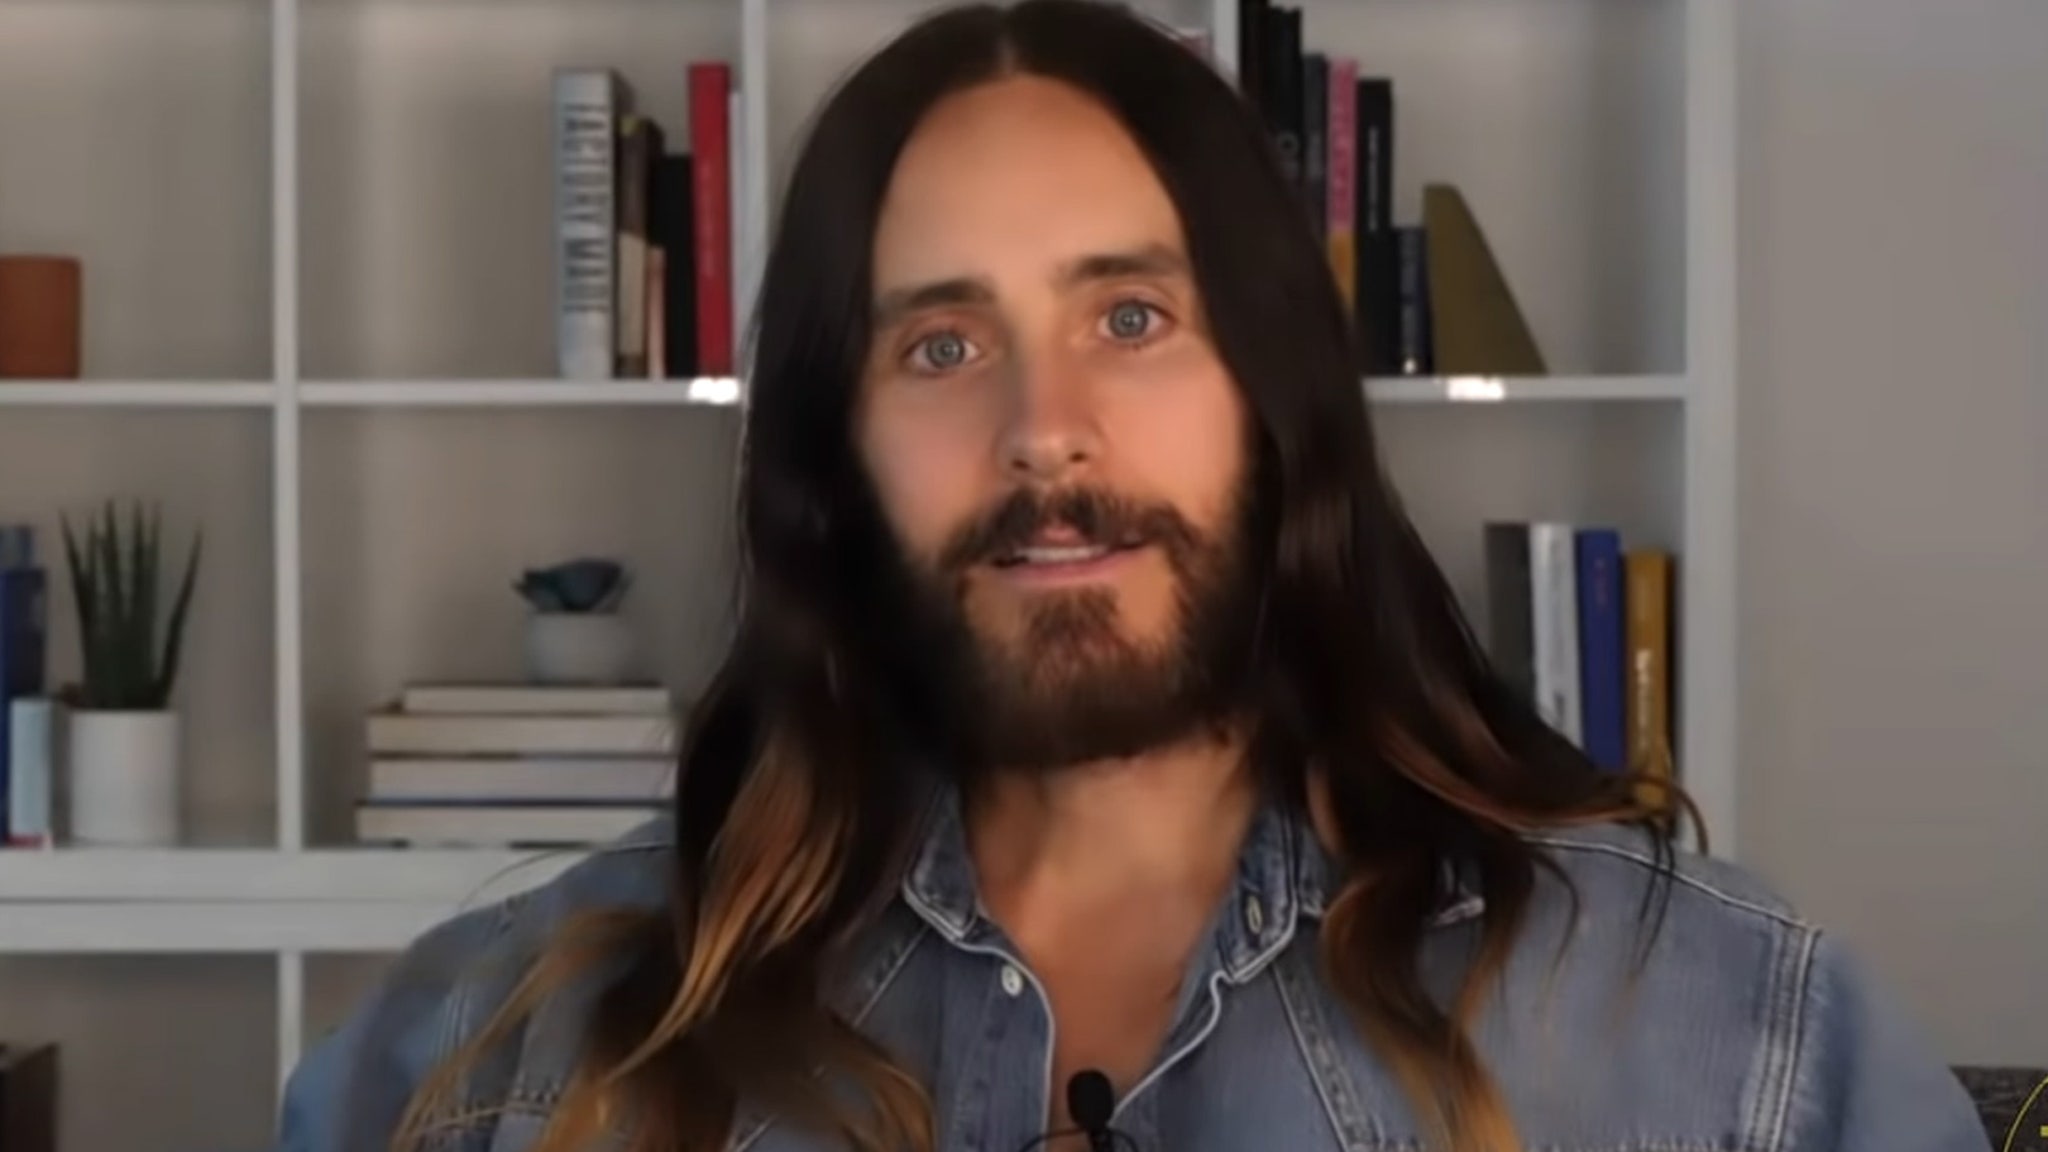 Jared Leto recalls returning from a silent meditation retreat following the closure of Covid-19